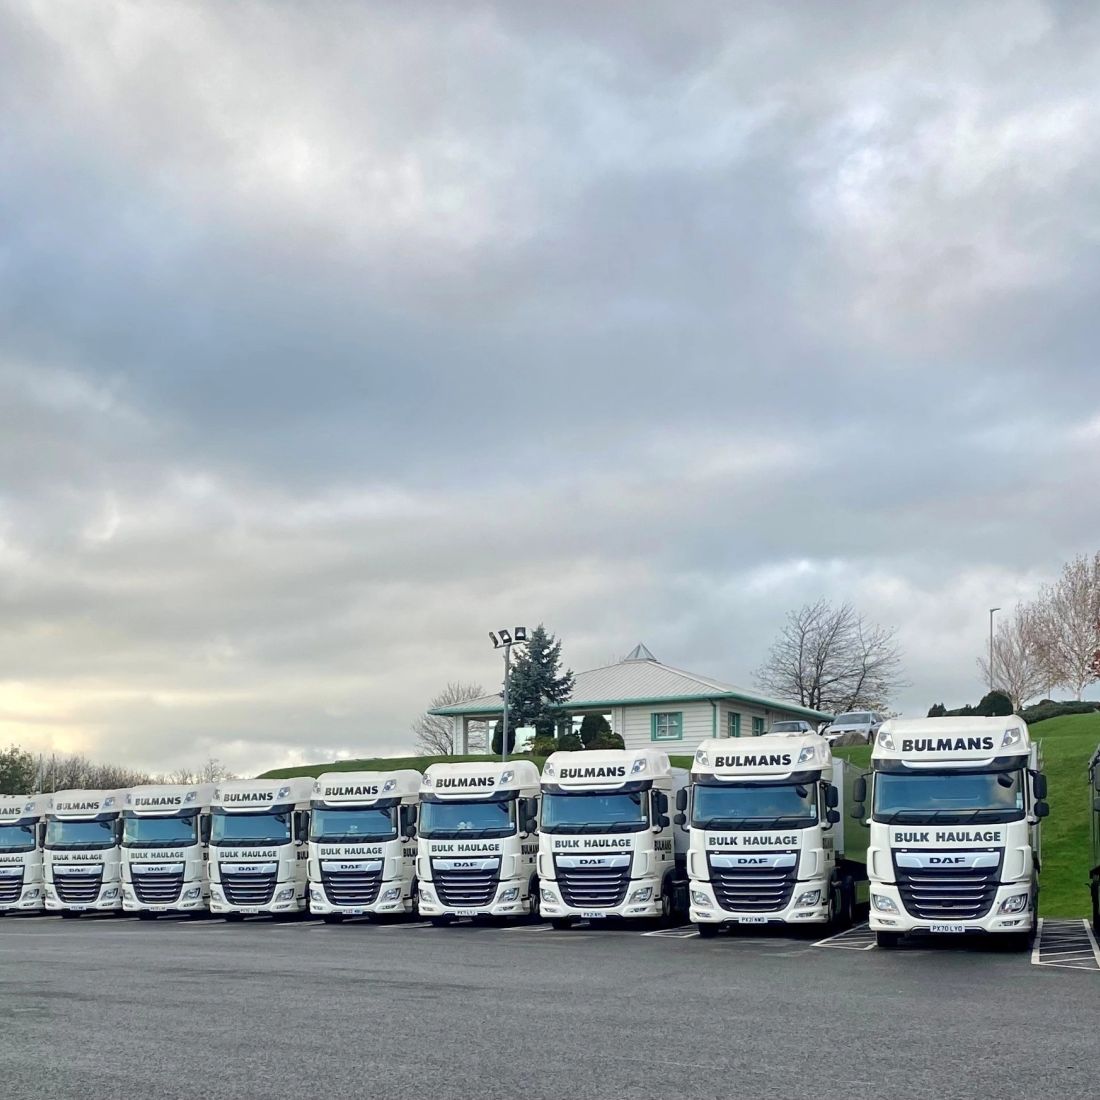 A lineup of Bulmans Bulk Haulage vehicles, showcasing a fleet of white DAF trucks with the company logo, ready for nationwide transport services.